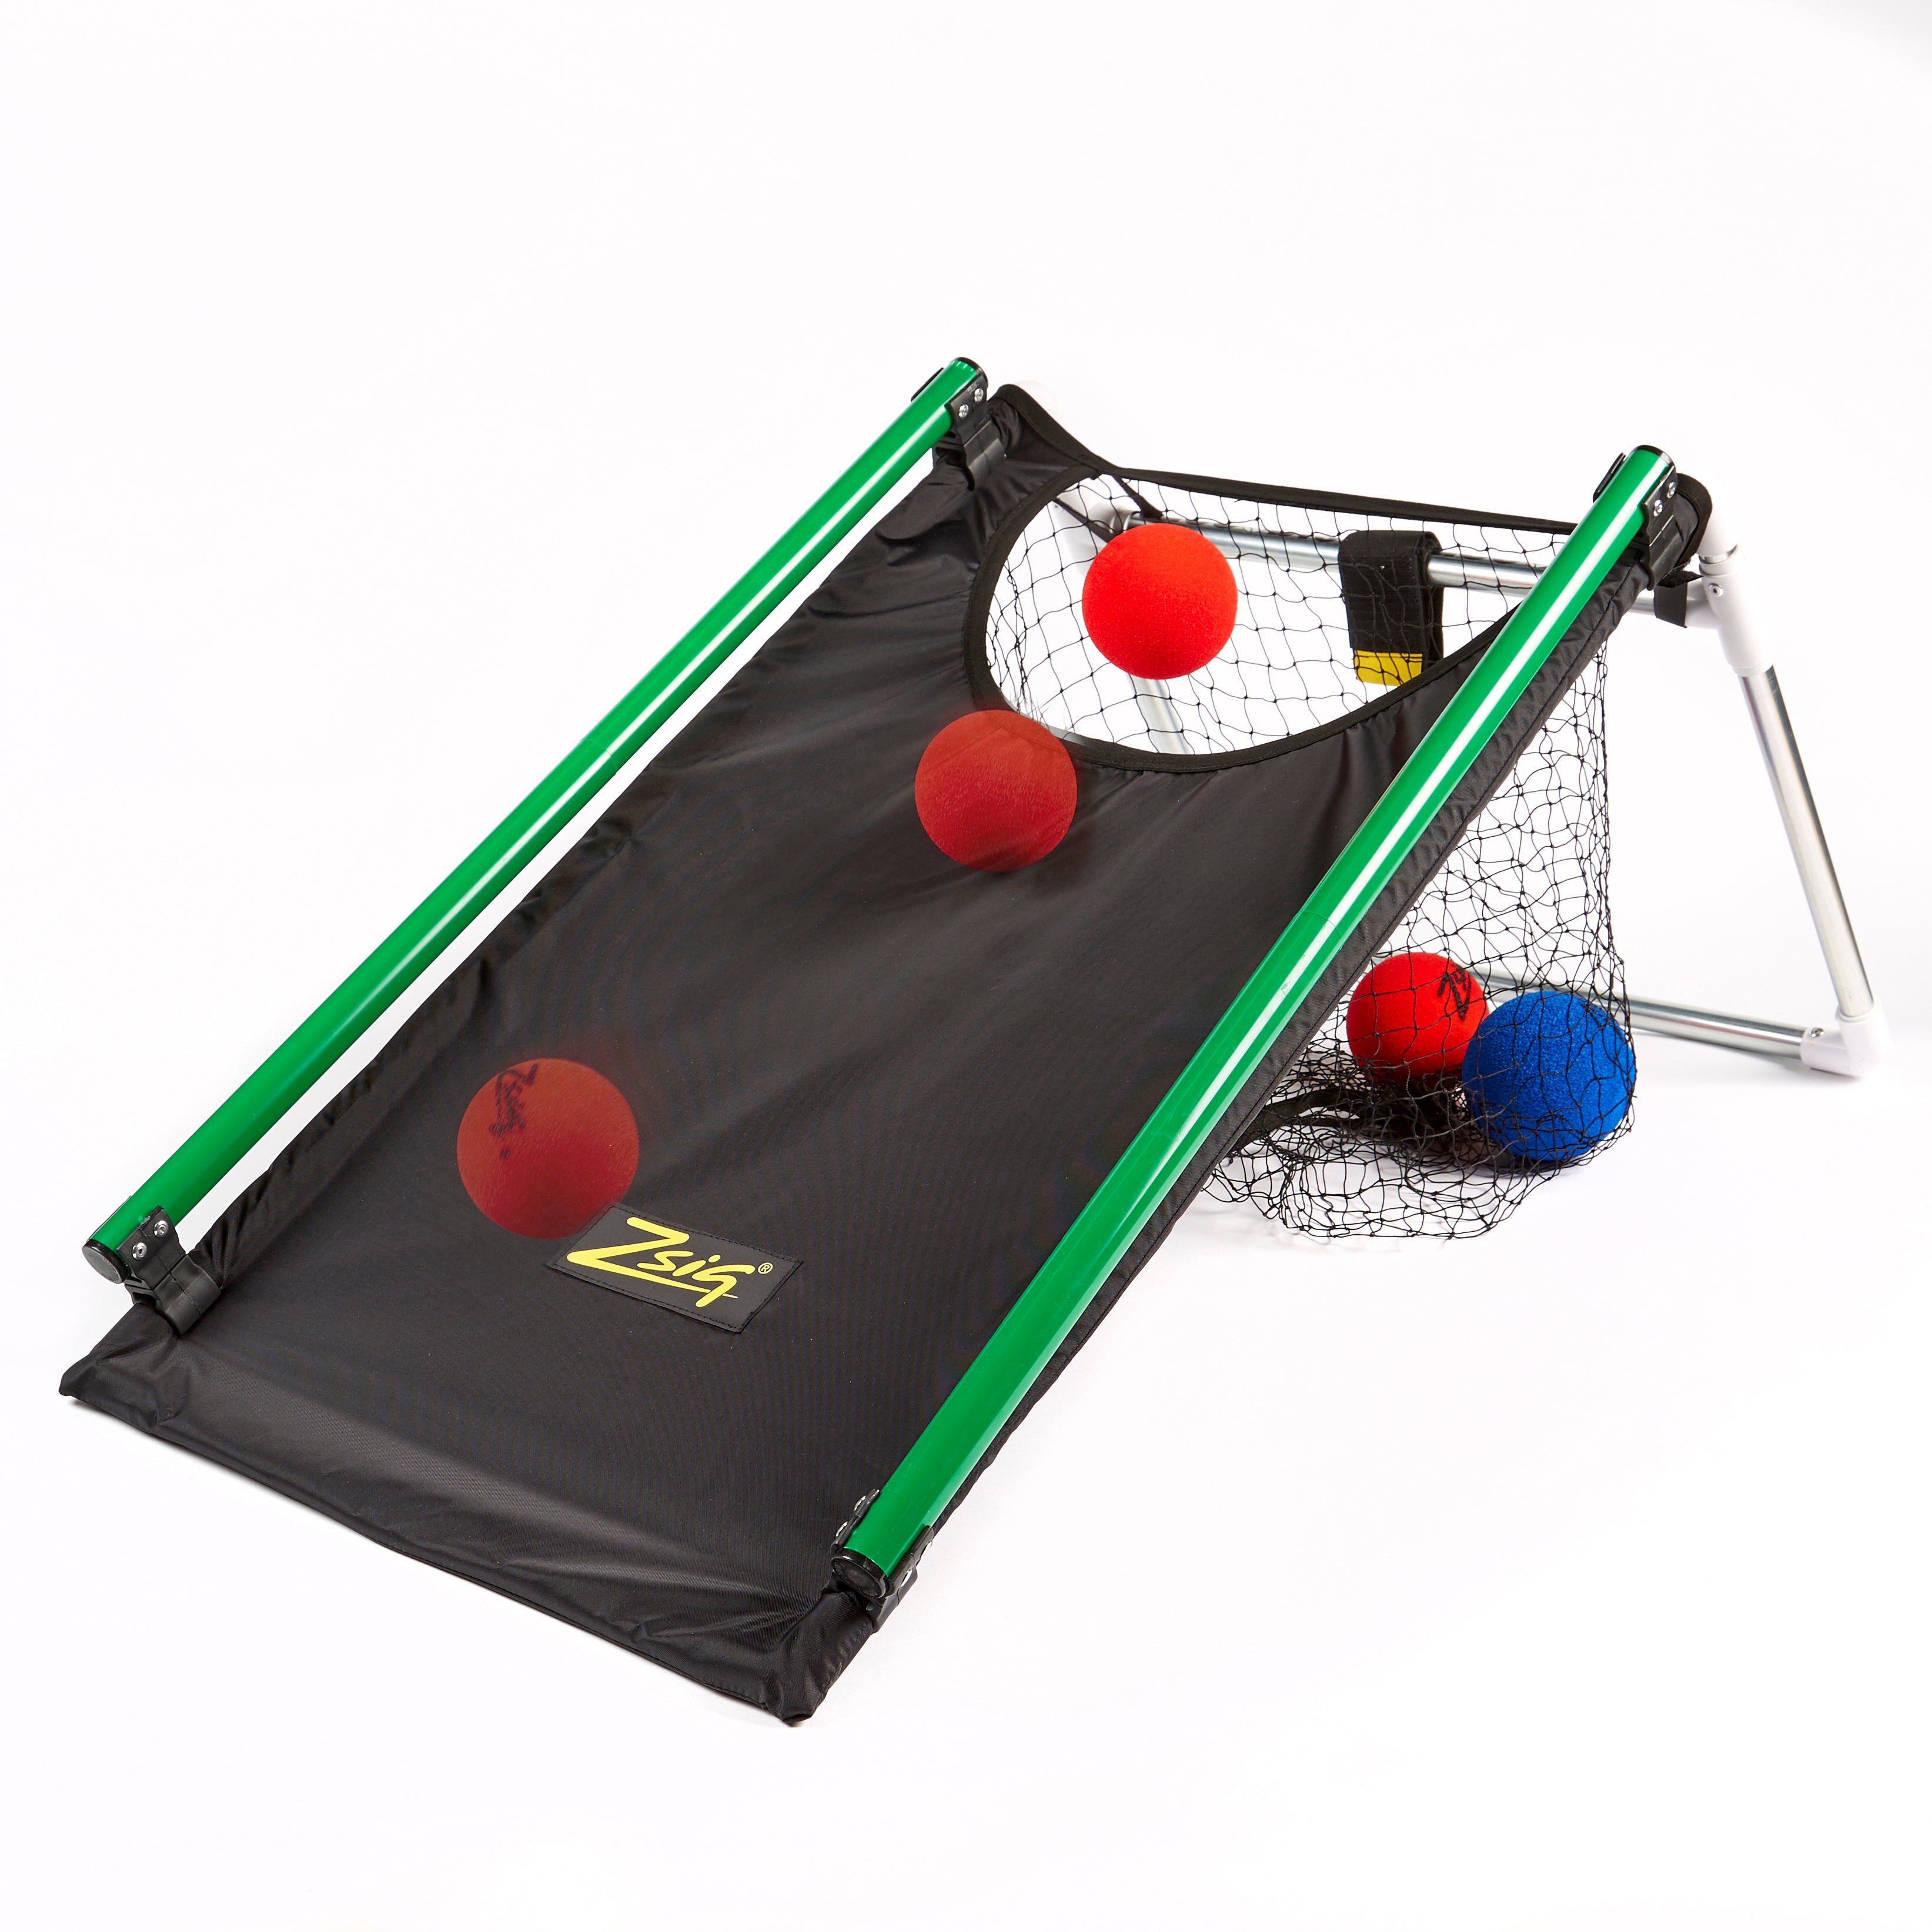 Zsig Ball Rollling Ramp showing optional clip-on side rails